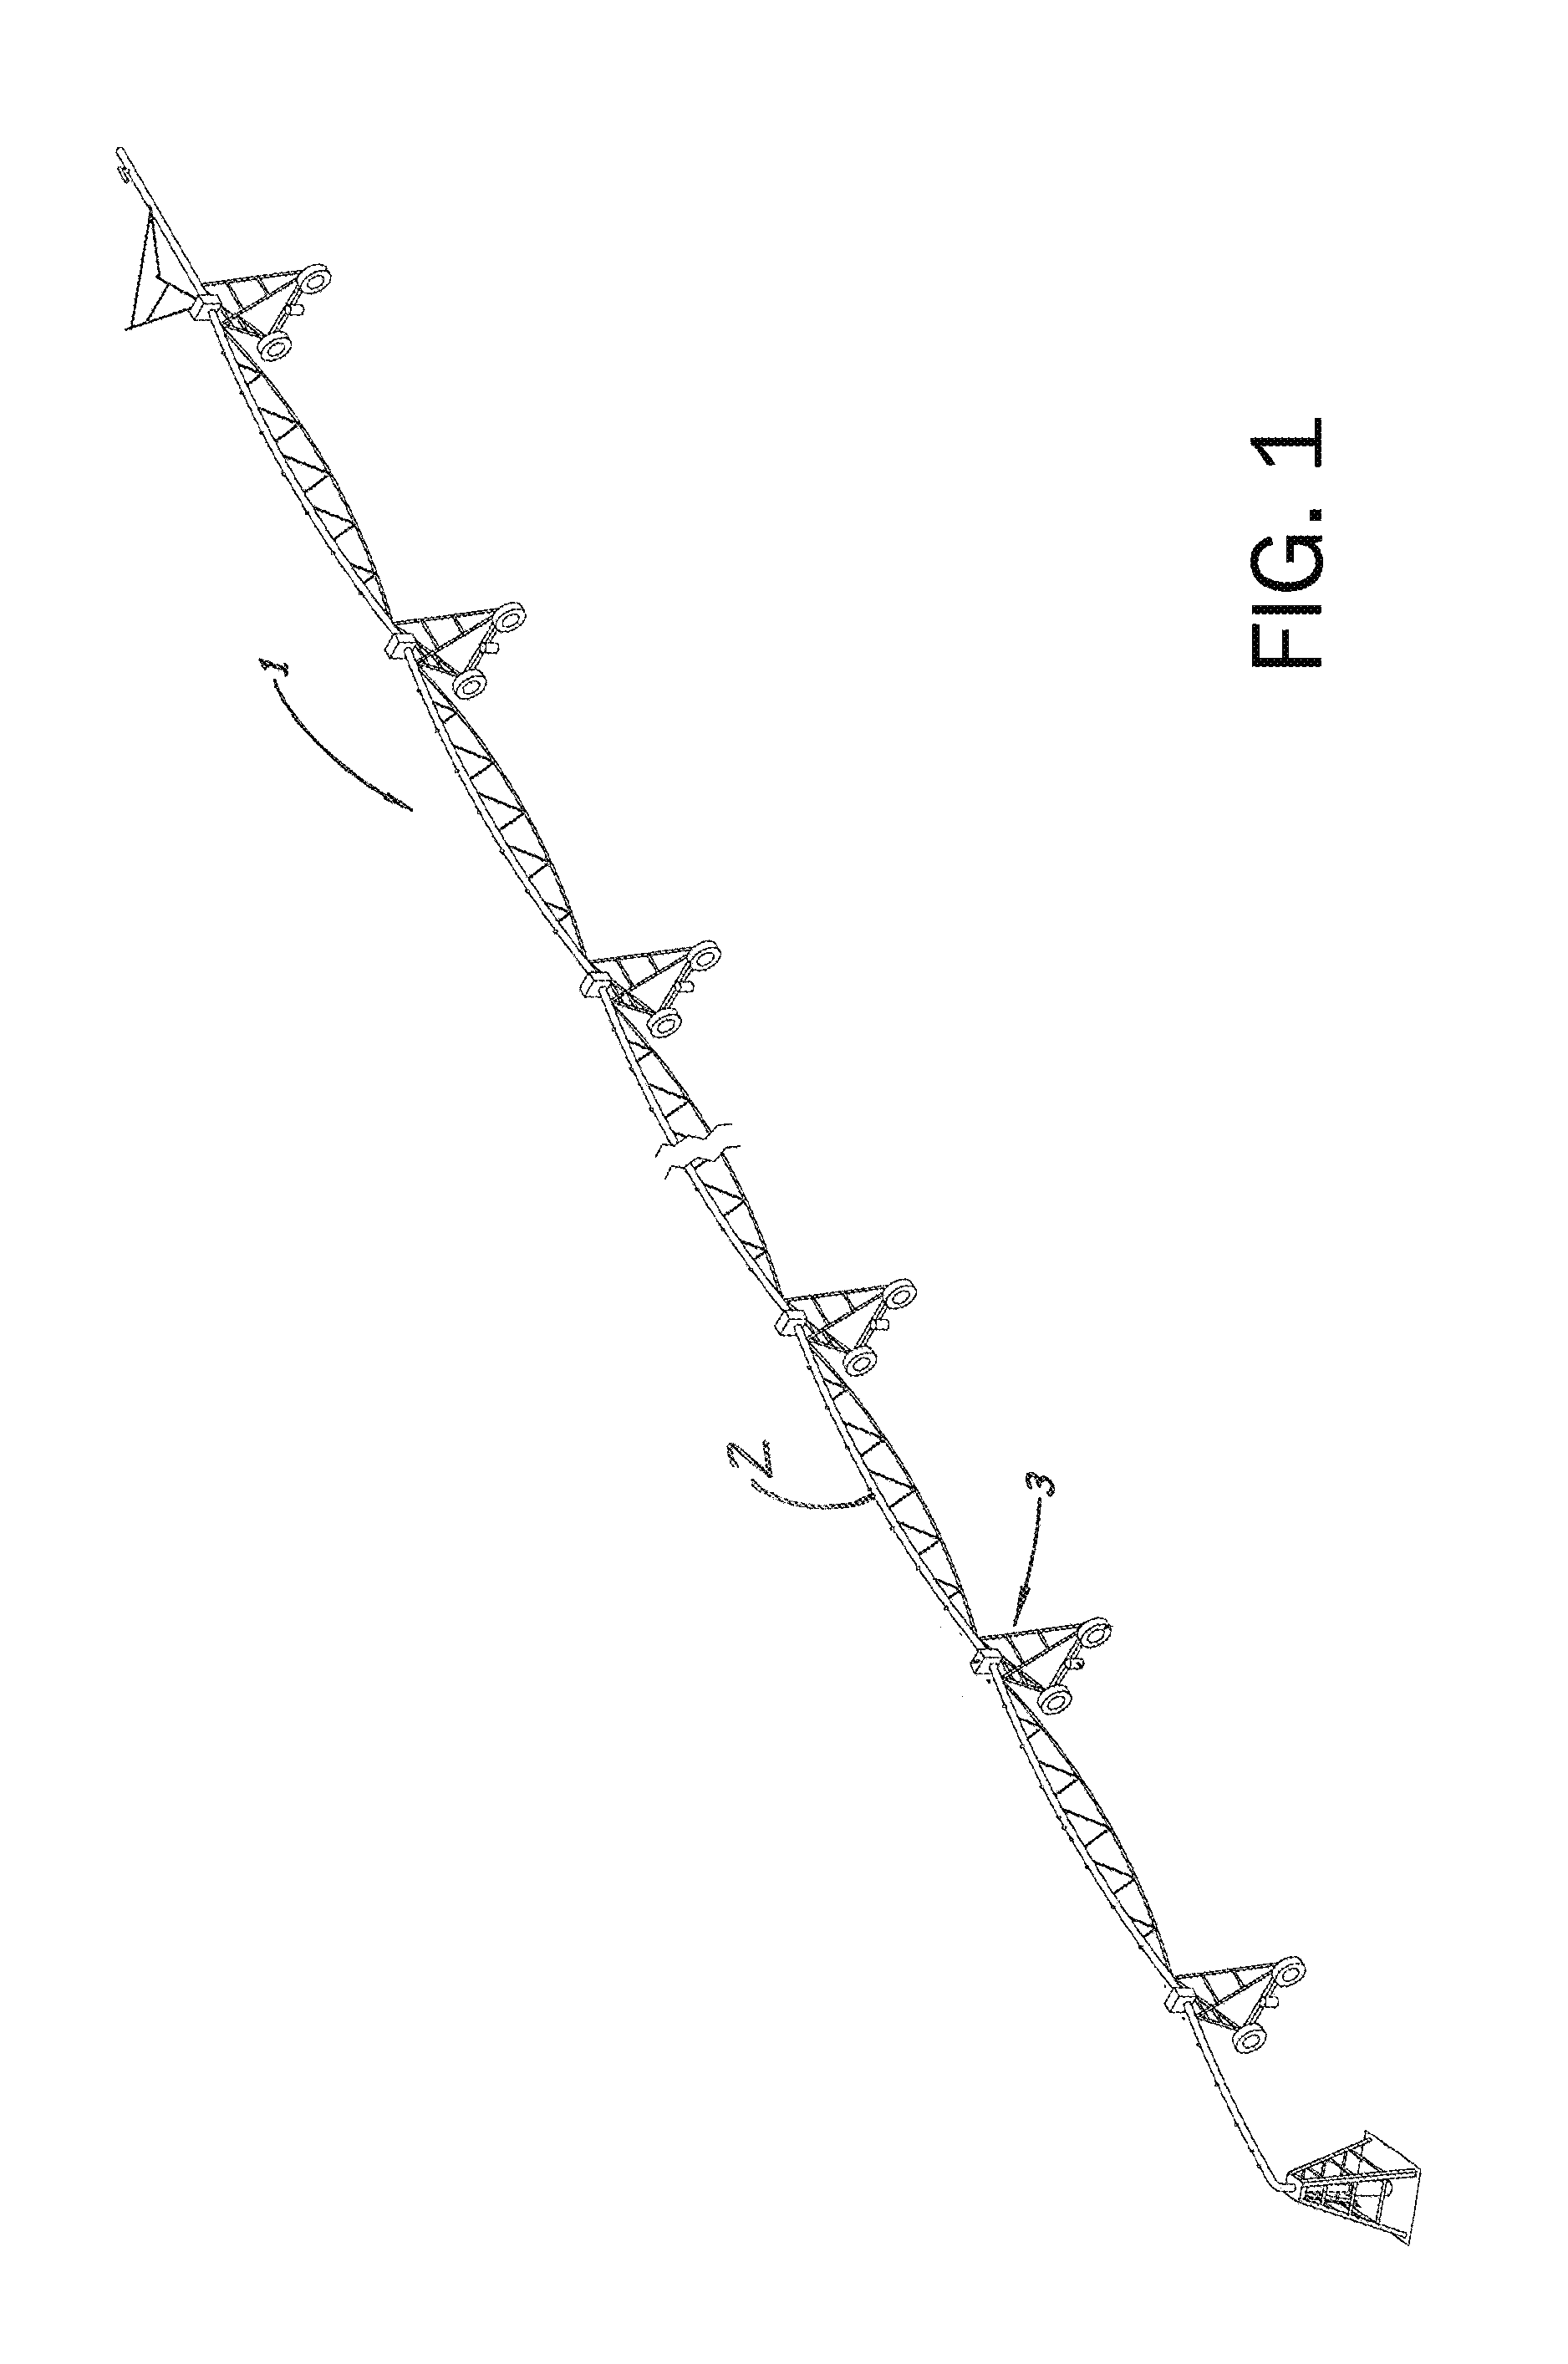 System and method for moving spans of an irrigation system